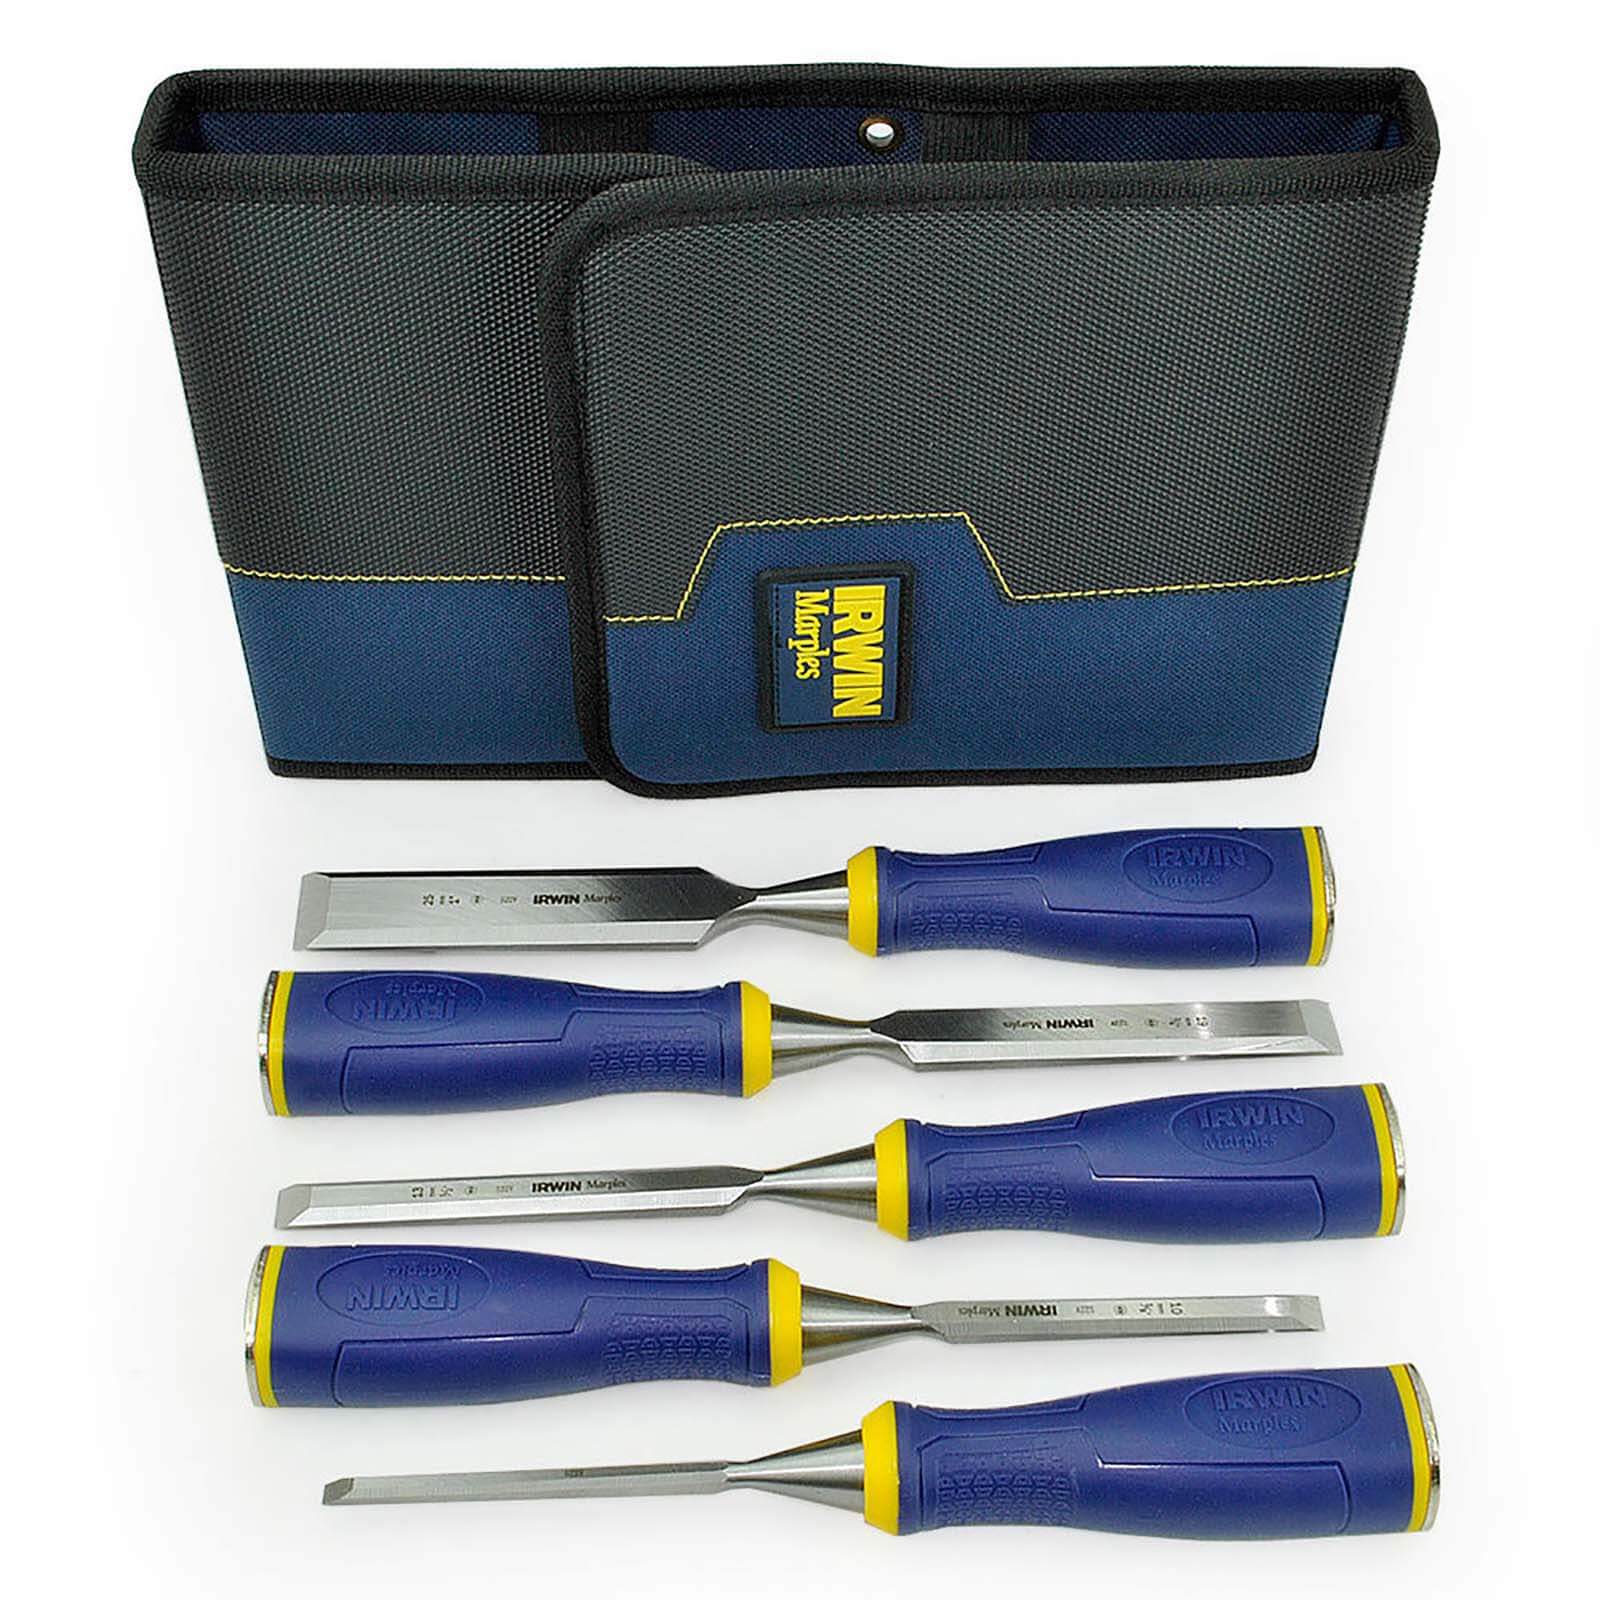 Irwin Marples Chisel Ms500 5 Piece Set With Wallet